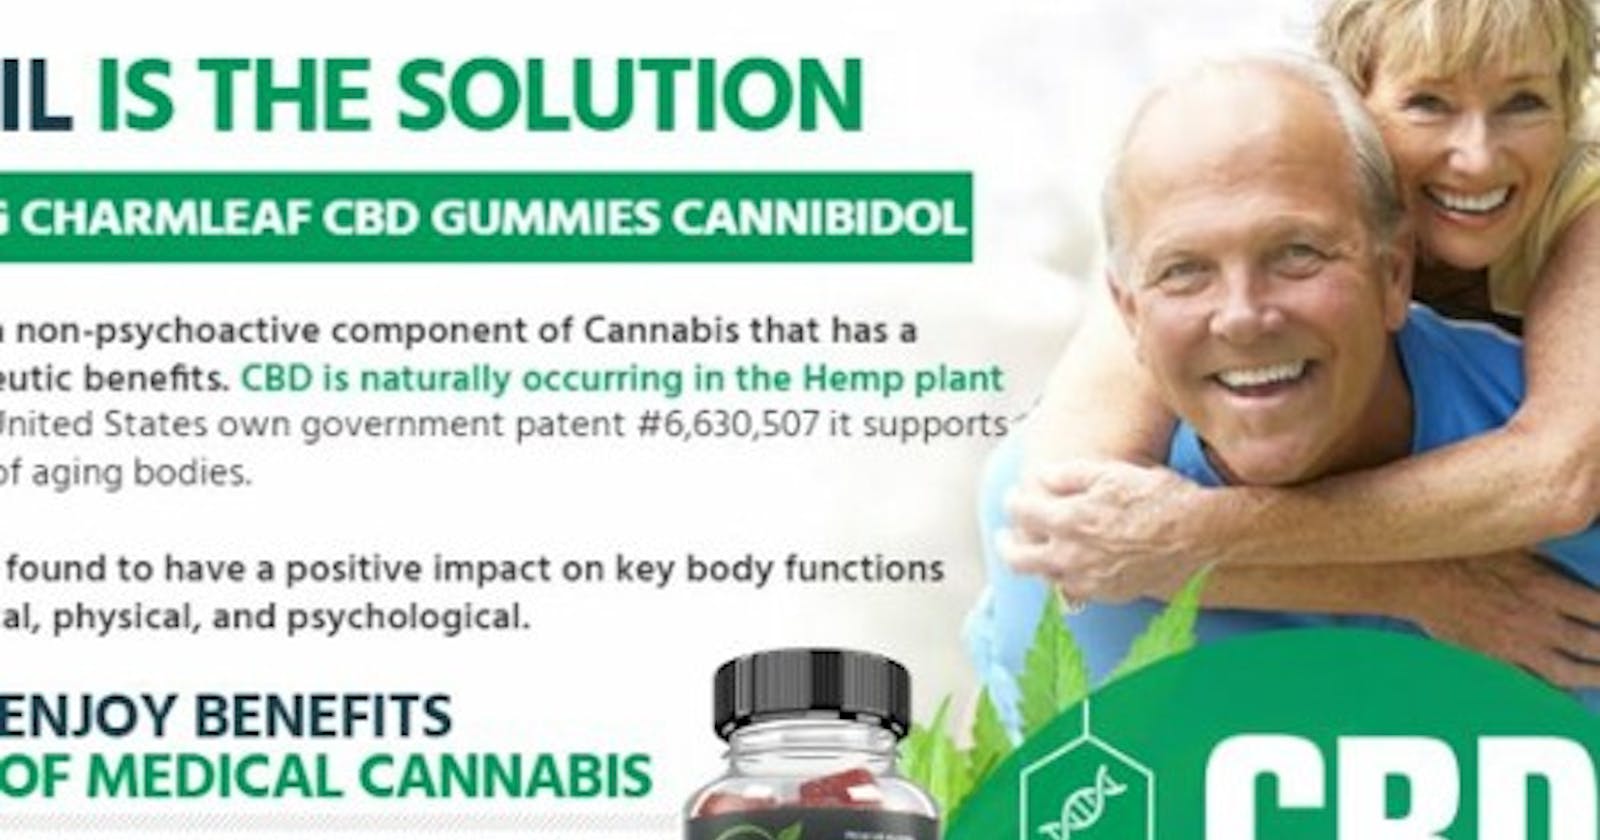 Charm Leaf CBD Gummies REVIEWS: (SCAM OR TRUSTED) IS ULY CBD GUMMIES REALLY WORKS OR SAFE , BENEFITS, INGREDIENTS &Shocking PRICE!!?